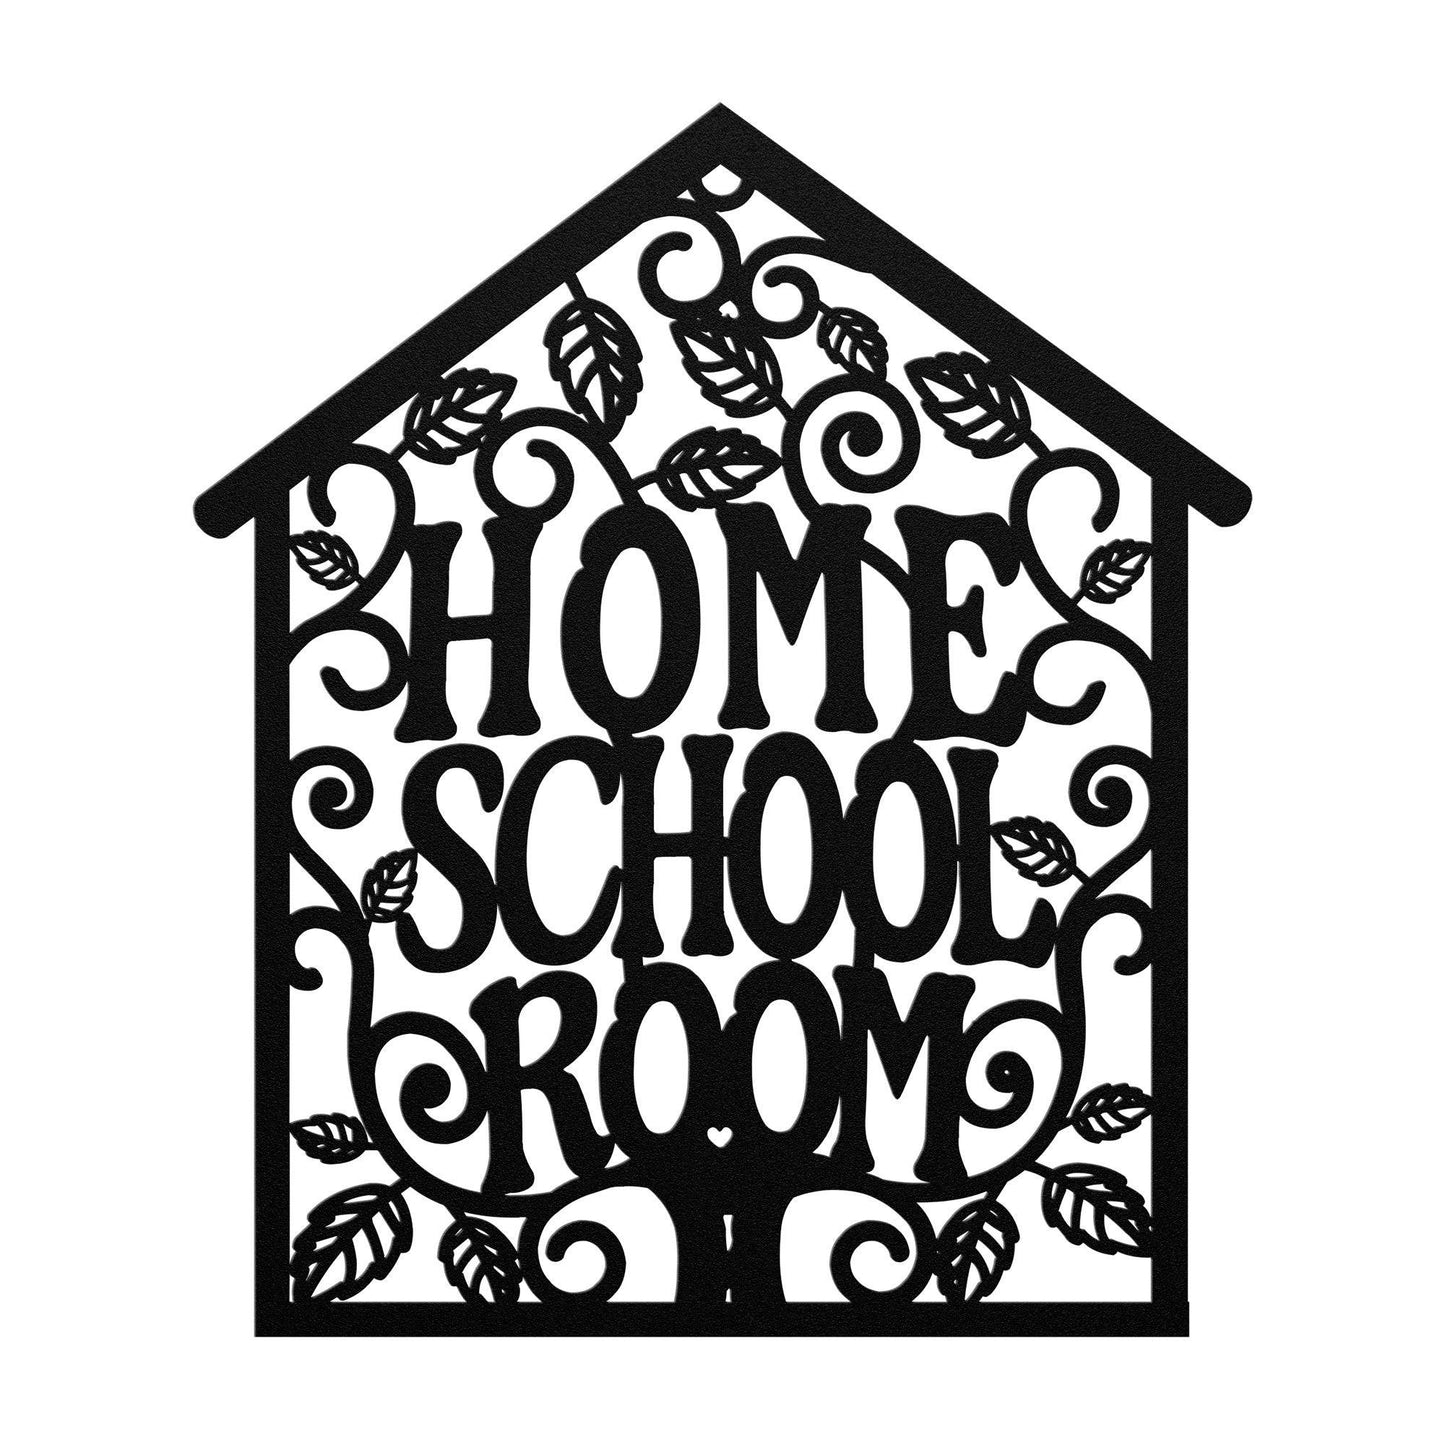 homeschool room sign for home school families nature leaves tree house wall decor